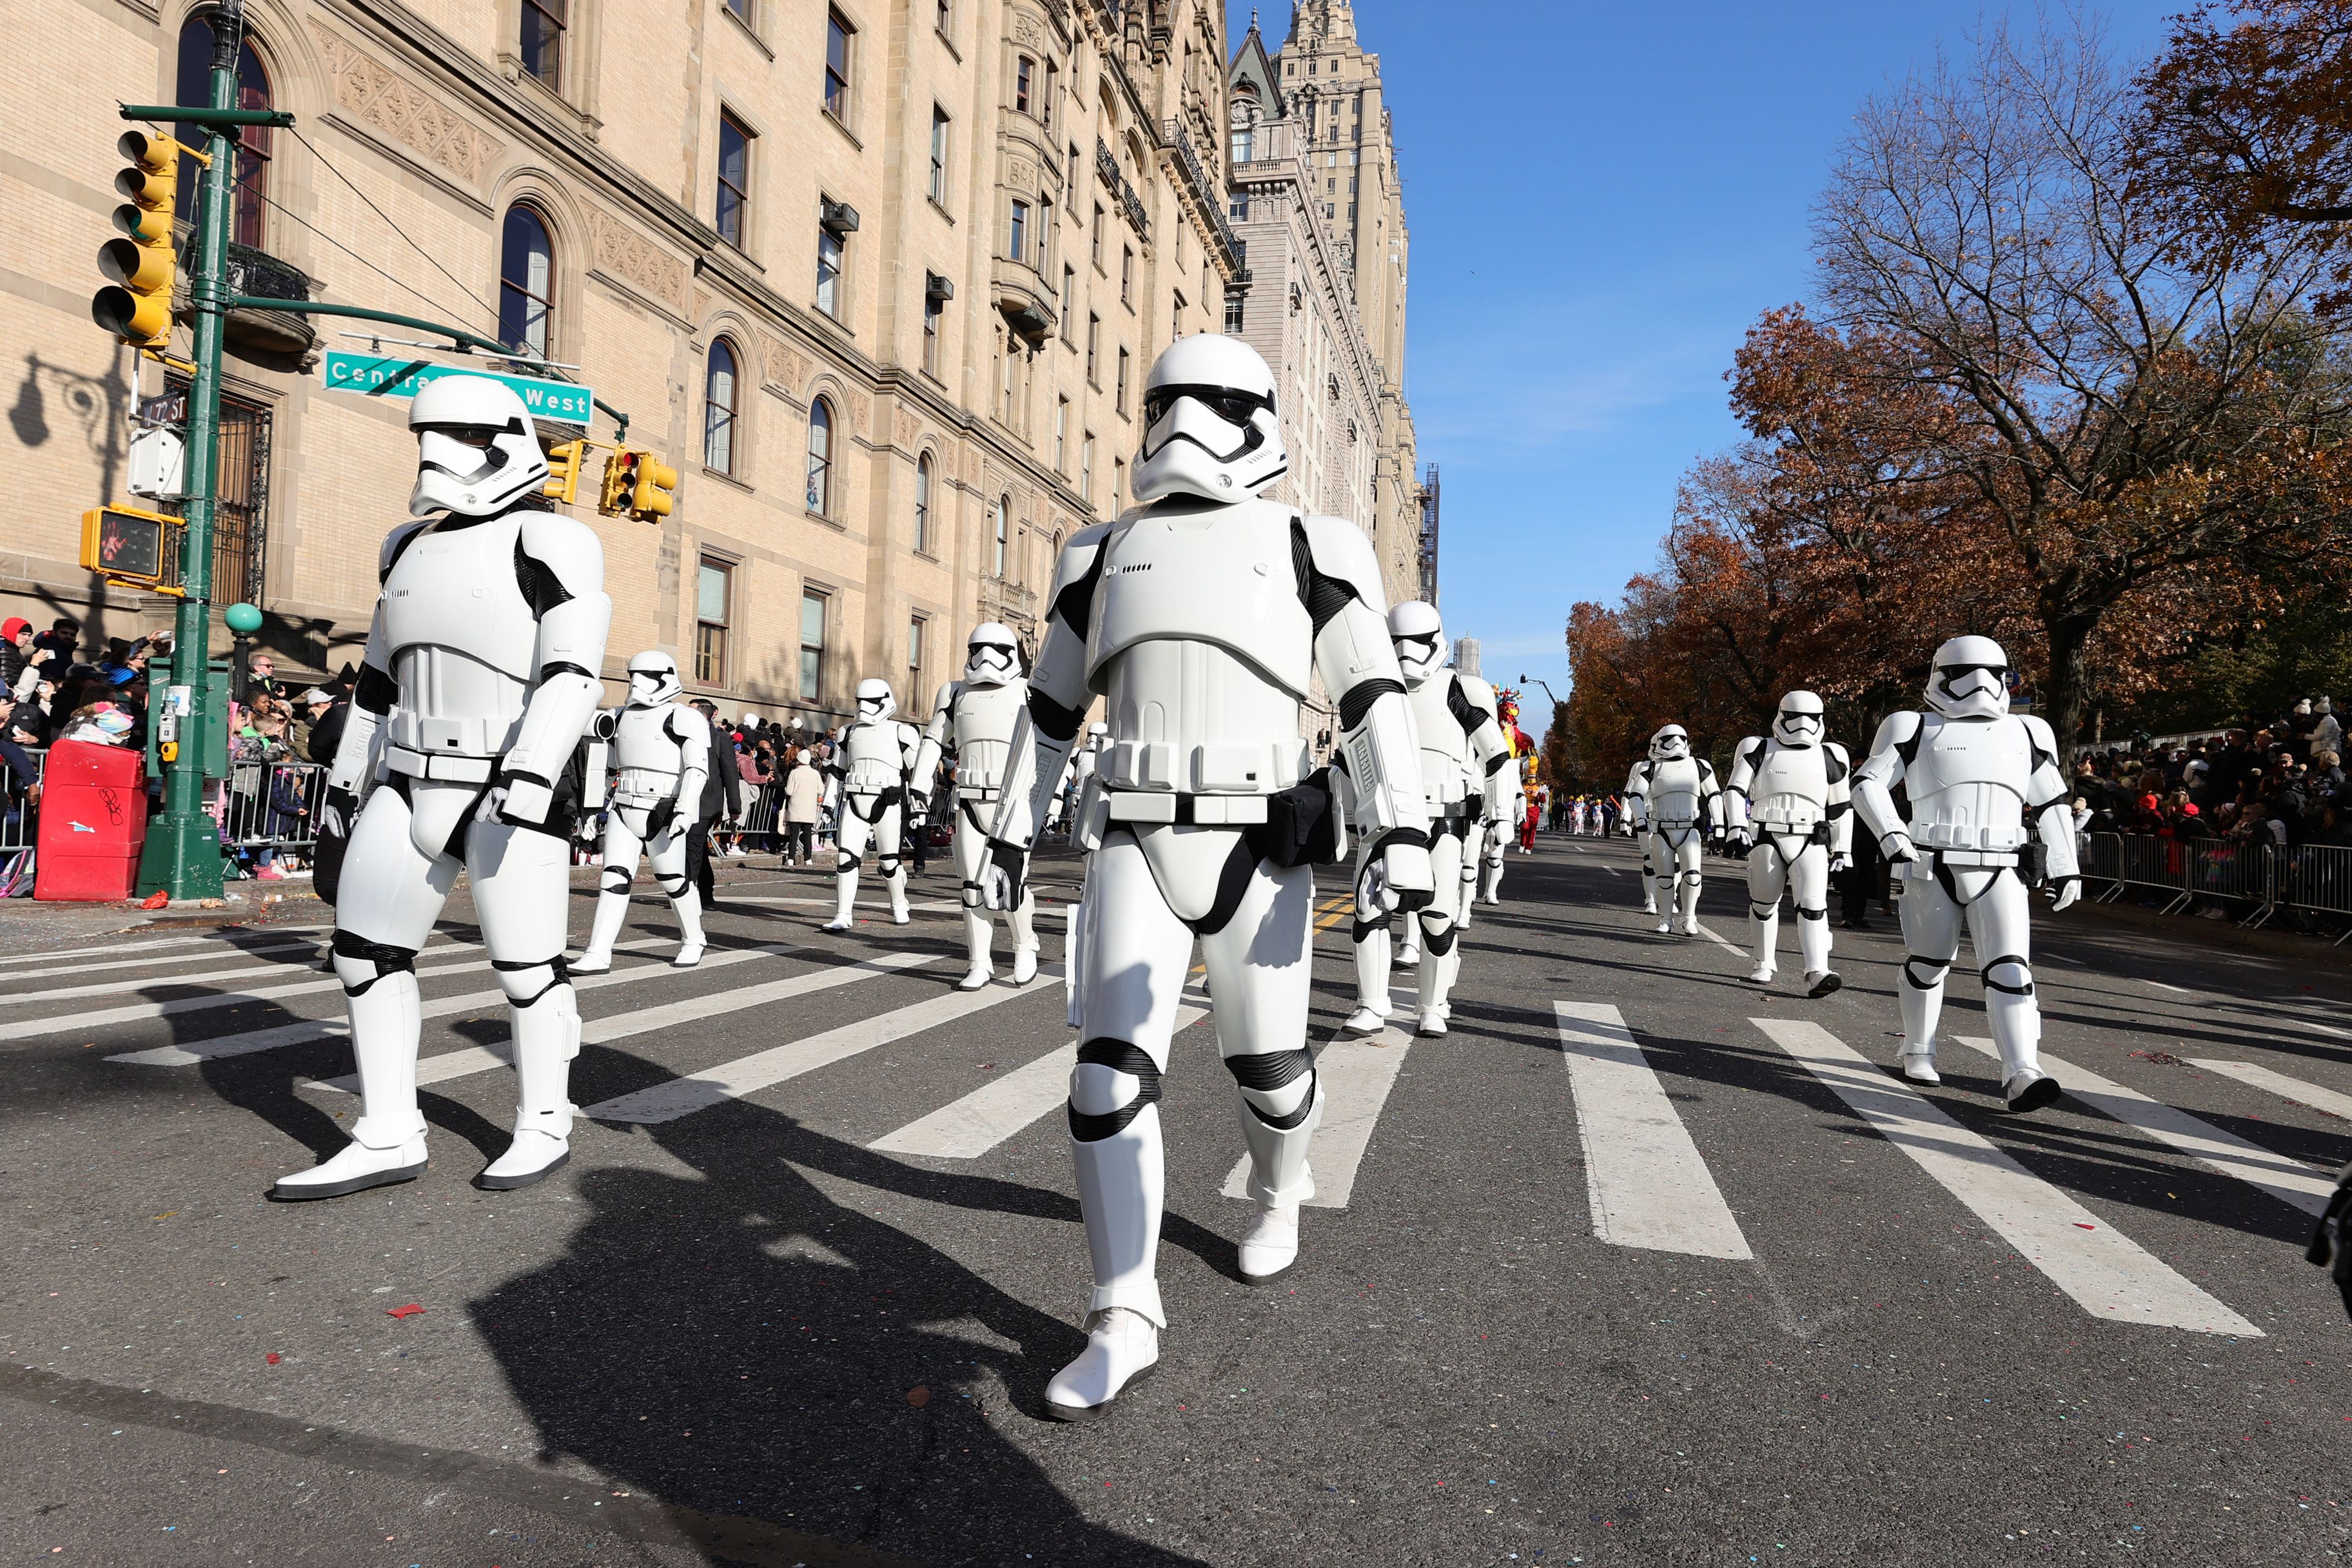 Stromtroopers during the 95th Macy's Thanksgiving Day Parade on November 25, 2021 in New York City. (Photo by Theo Wargo/Getty Images)